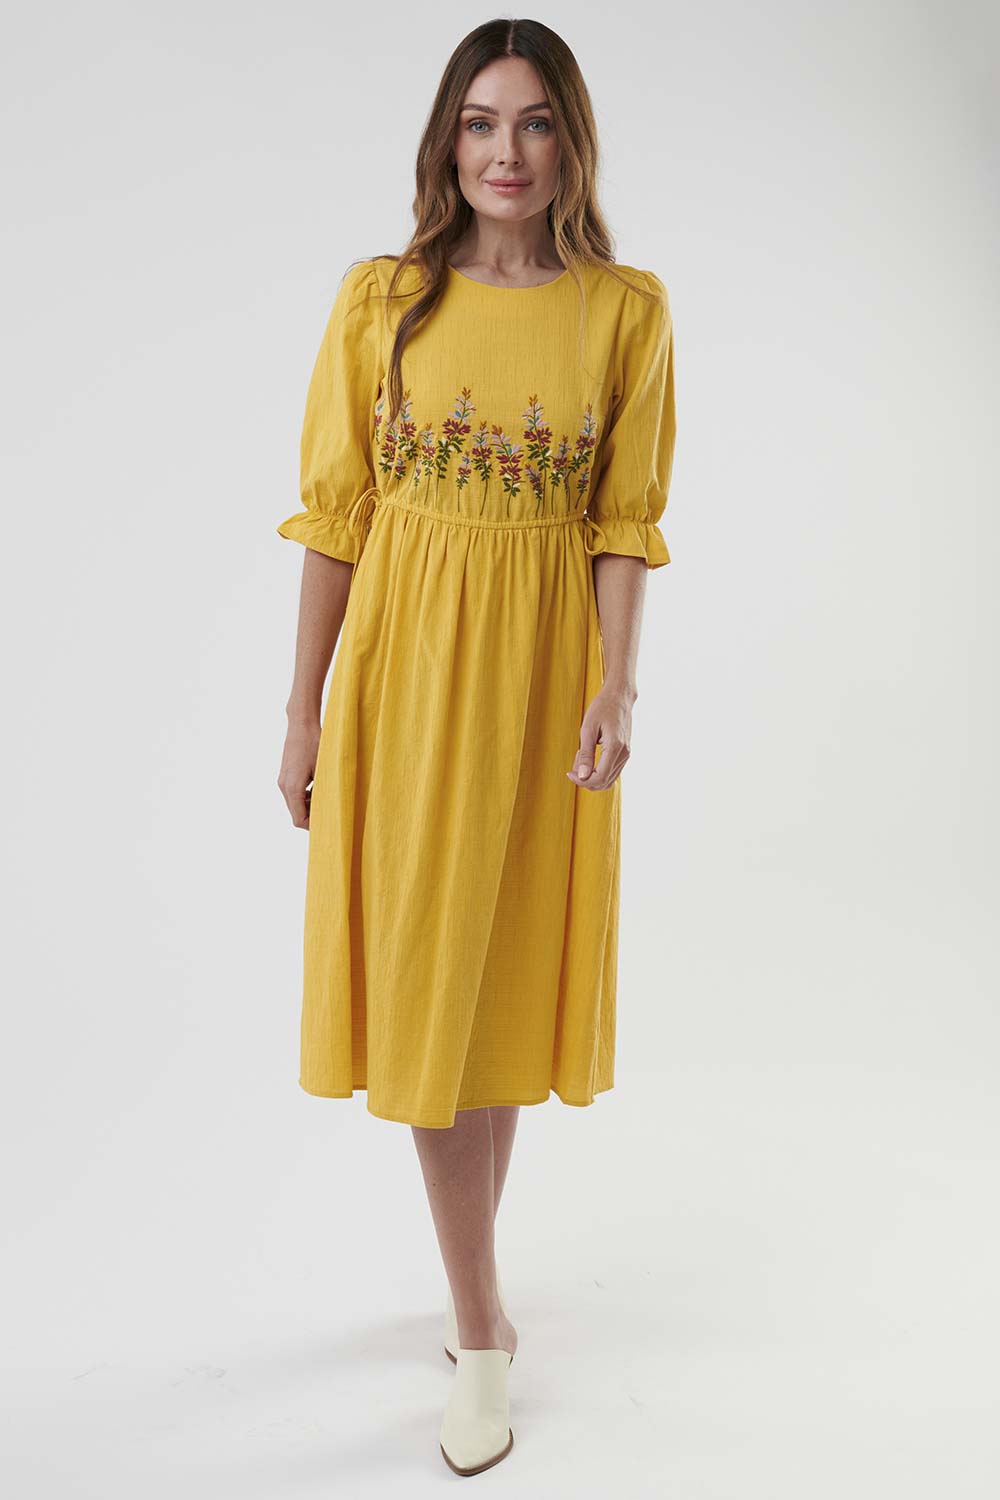 Dancing in a Dream Embroidered Yellow Dress